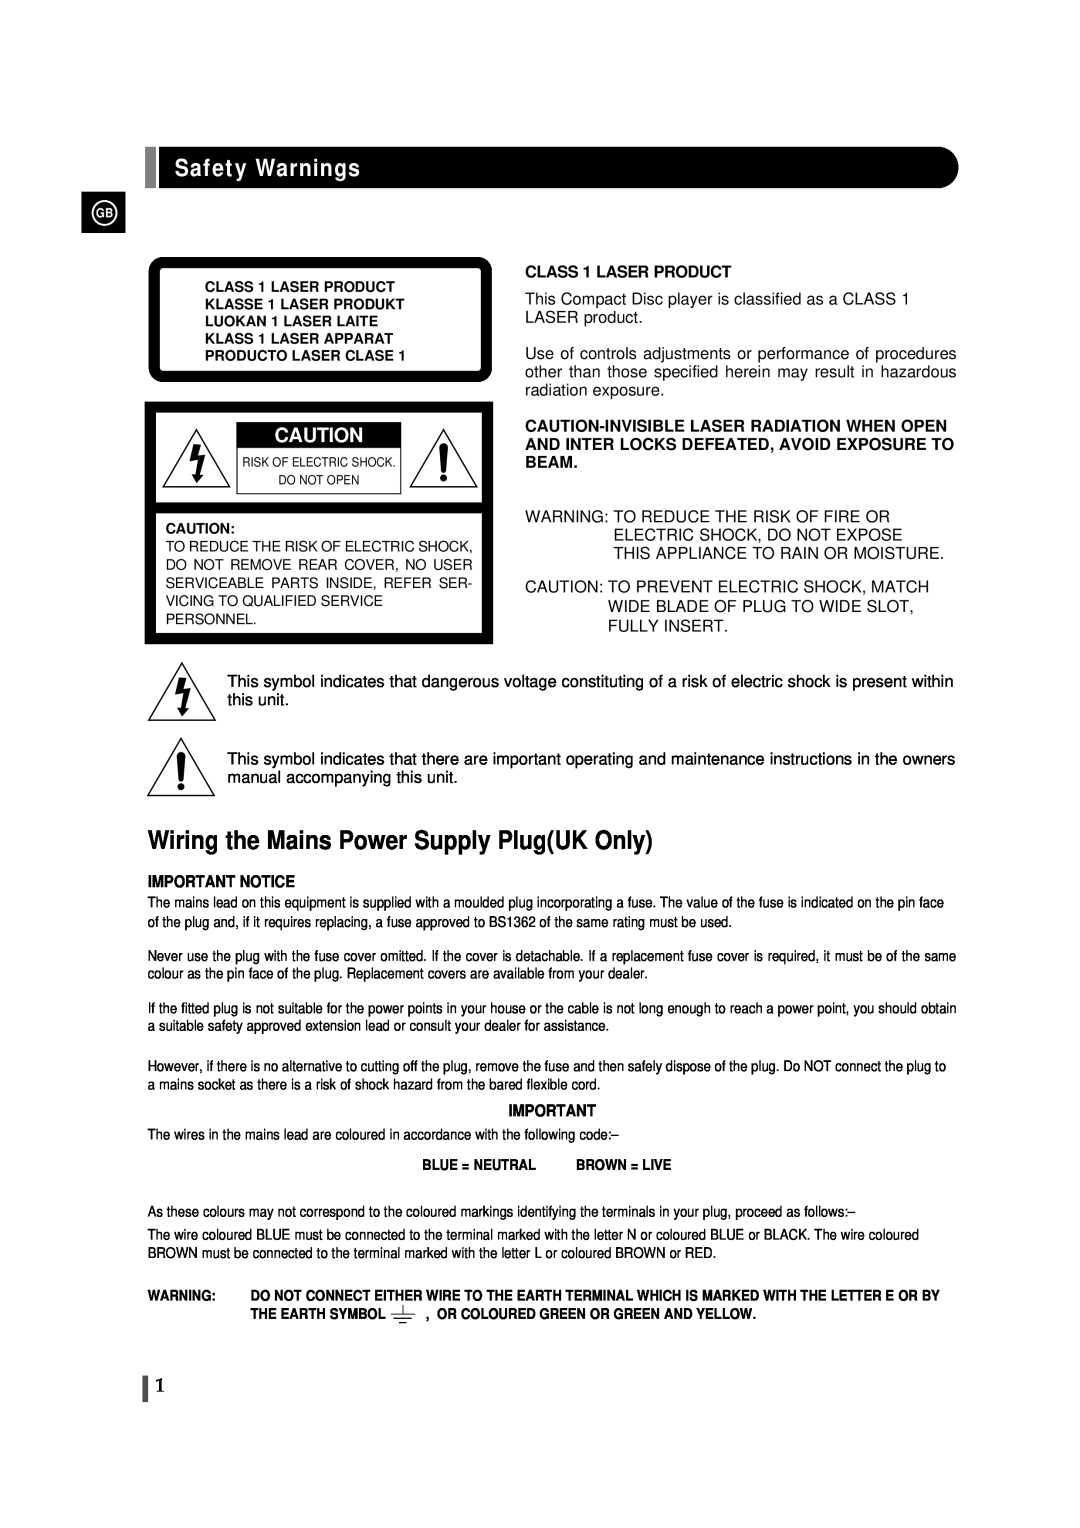 Samsung EV-1S instruction manual Safety Warnings, Wiring the Mains Power Supply PlugUK Only 